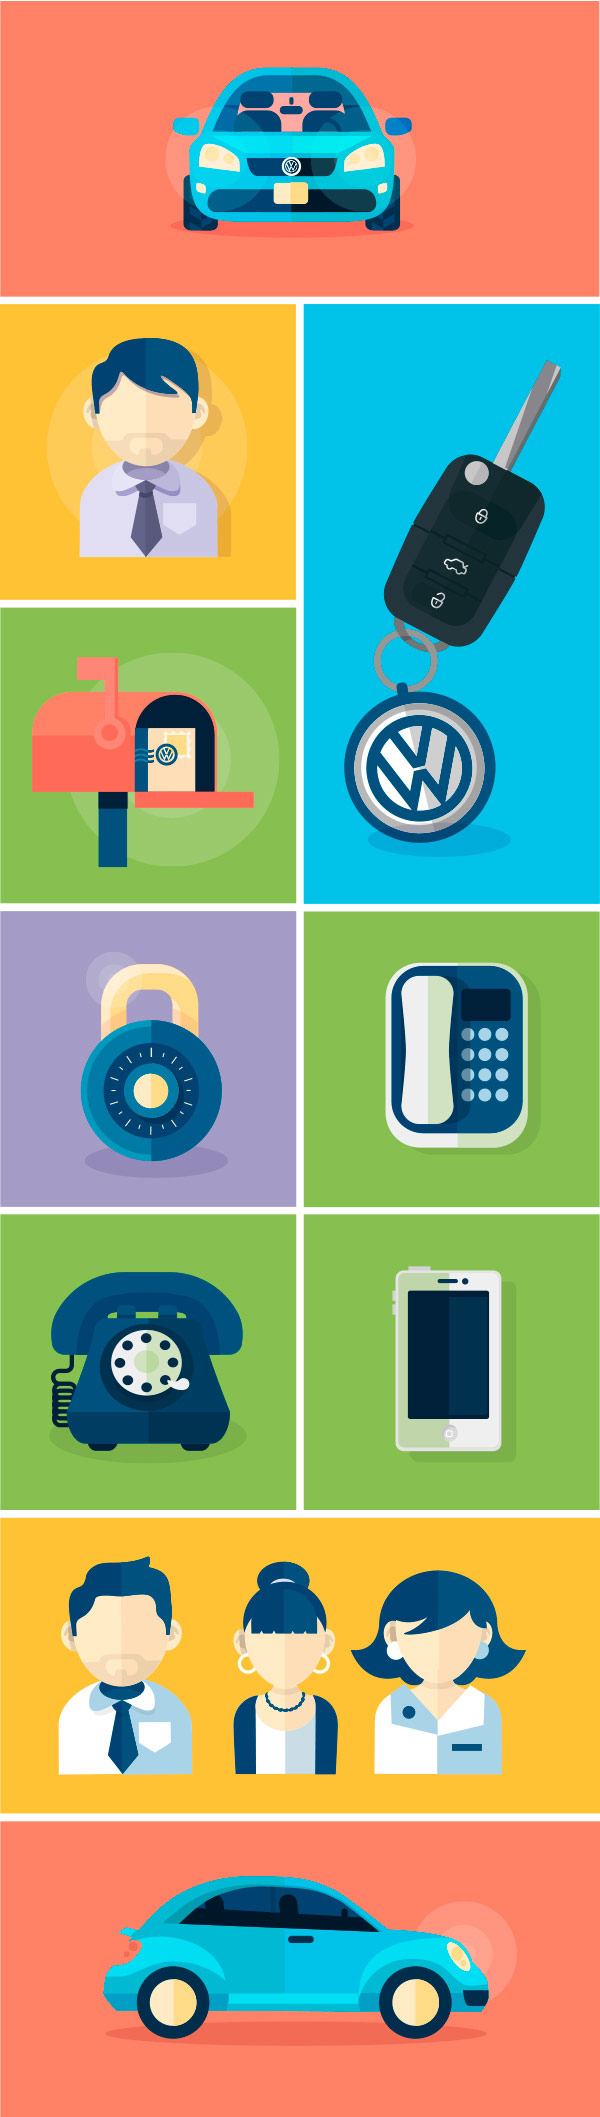 Vector illustrations for website icons.